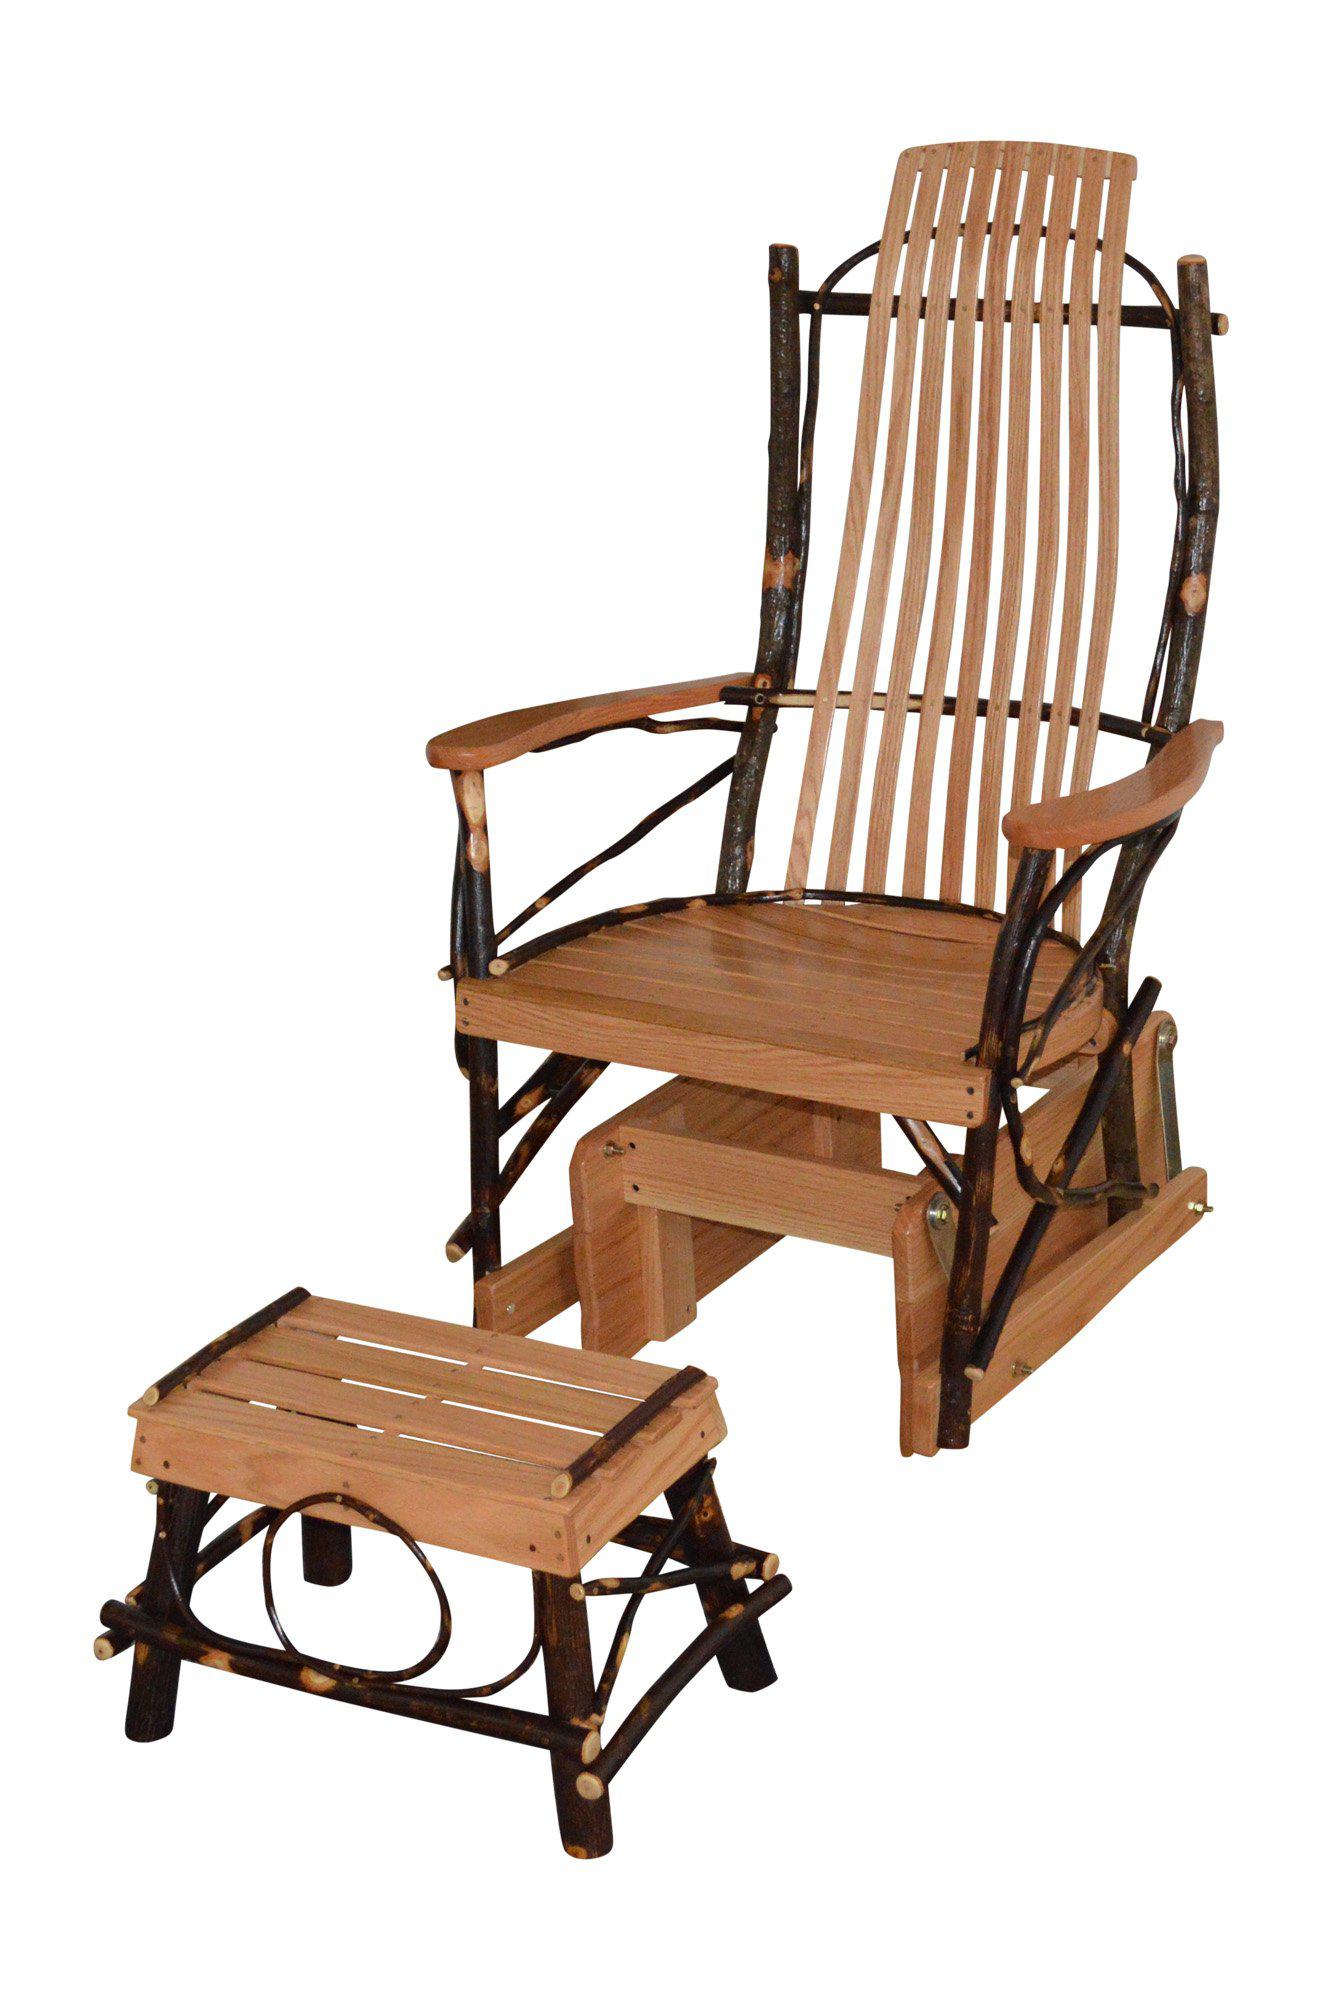 A&L Furniture Co. Amish Bentwood Hickory Glider Rocker with Foot Stool Set - LEAD TIME TO SHIP 4 WEEKS OR LESS